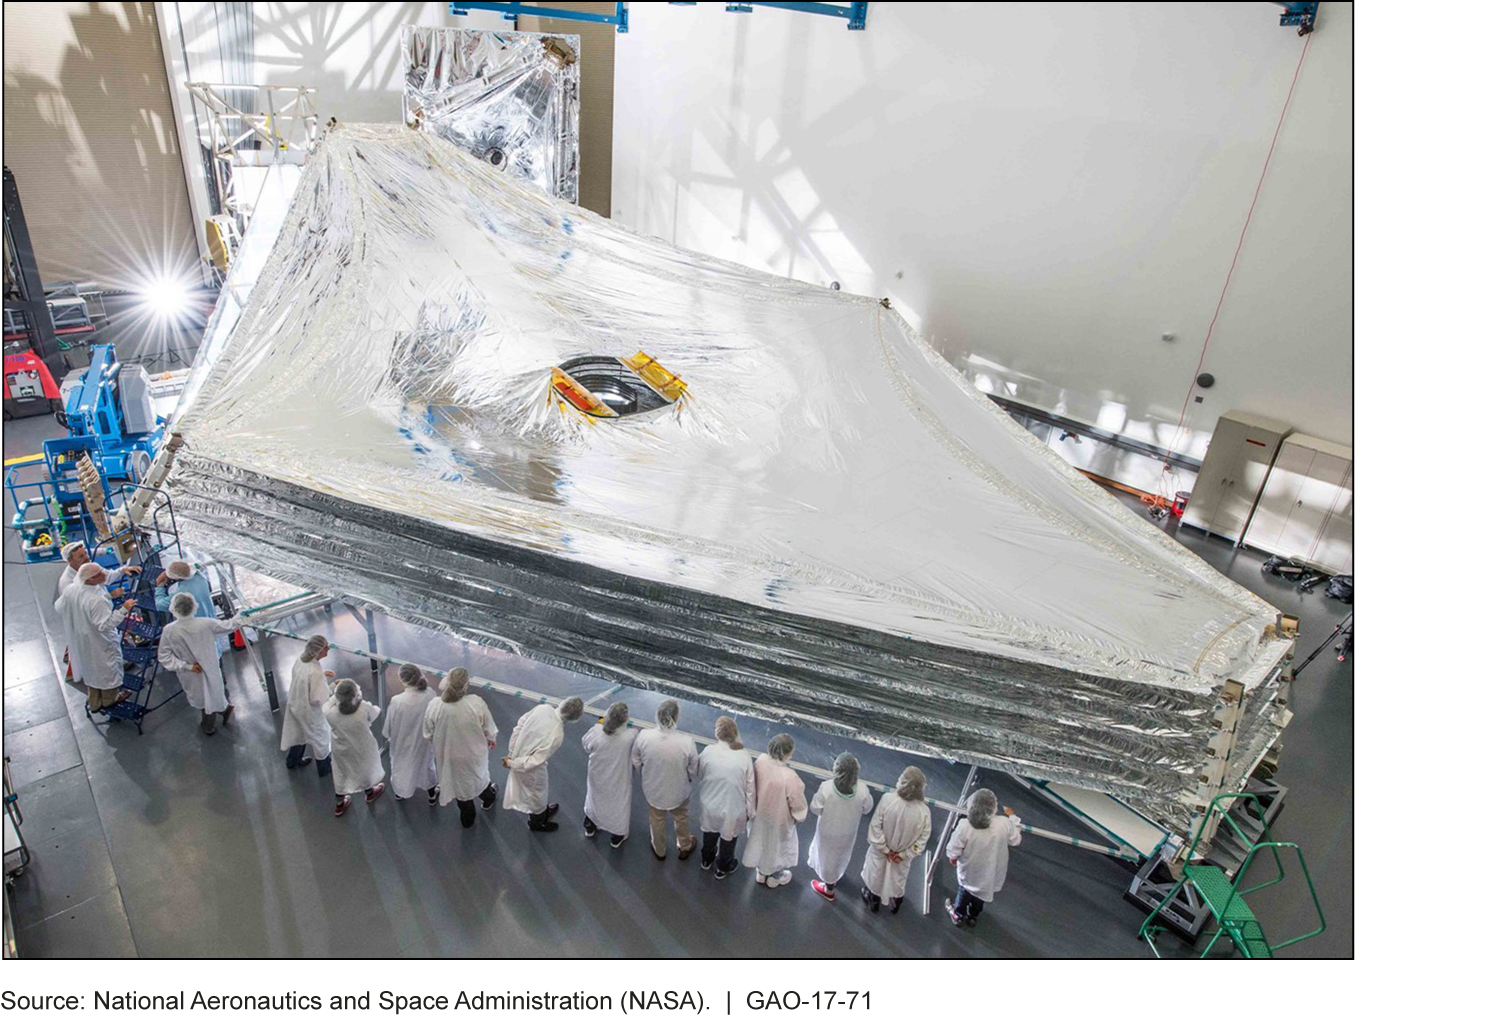 Five stacked layers of JWST's sunshield, which protects the spacecraft from the heat of the sun.